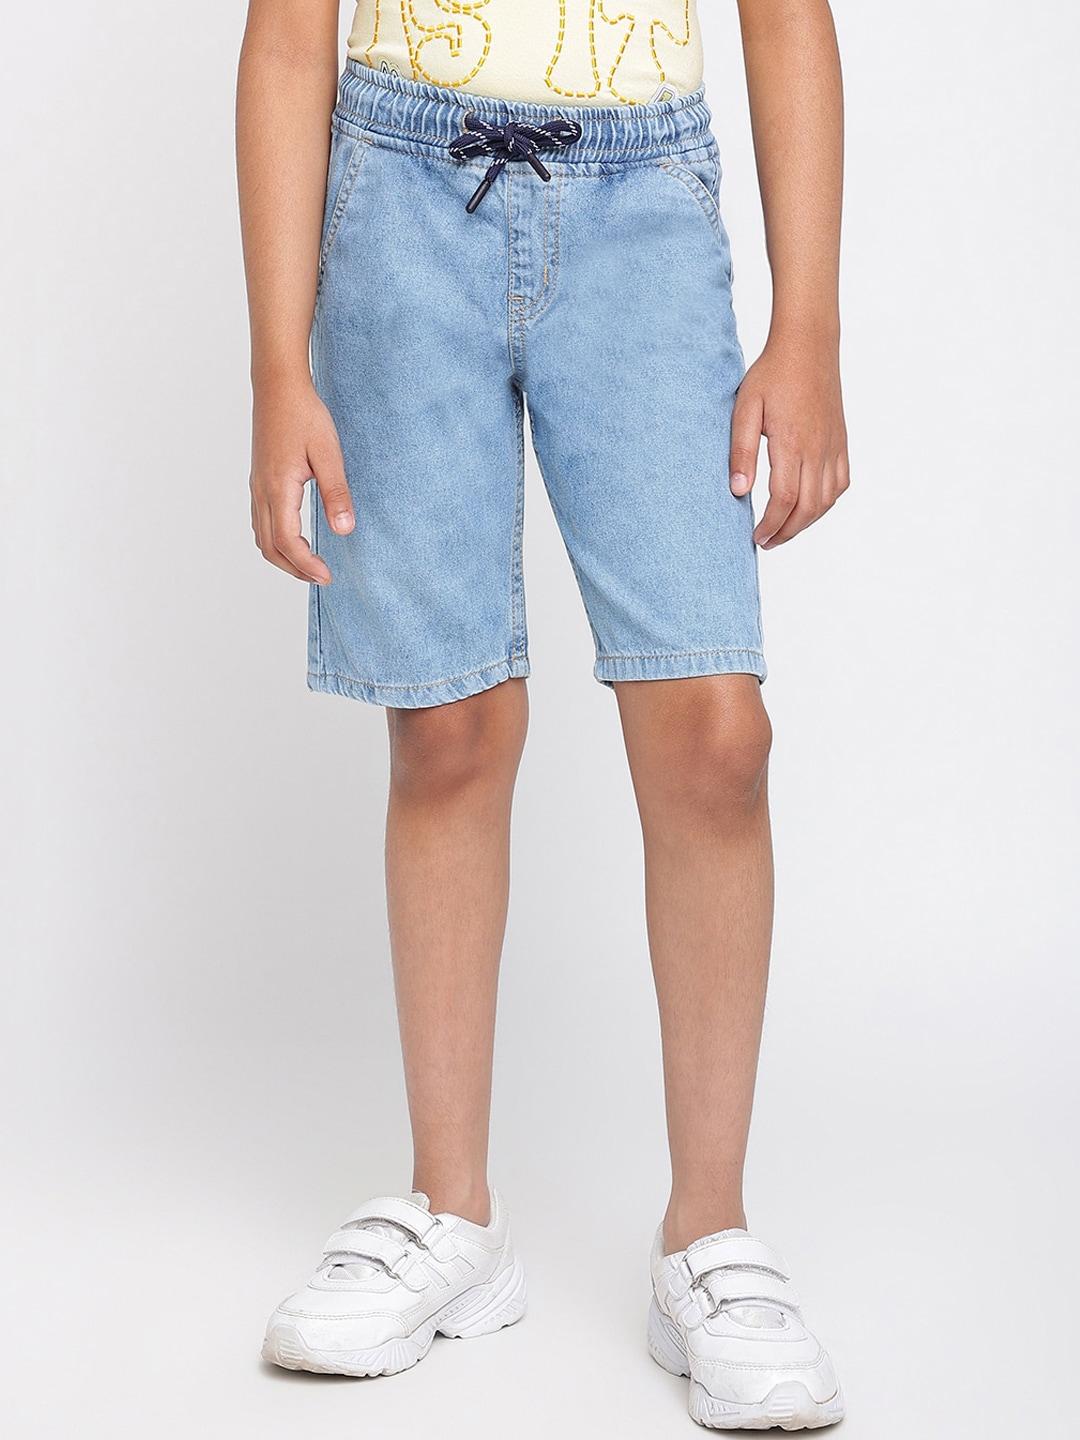 tales-&-stories-boys-washed-denim-shorts-technology